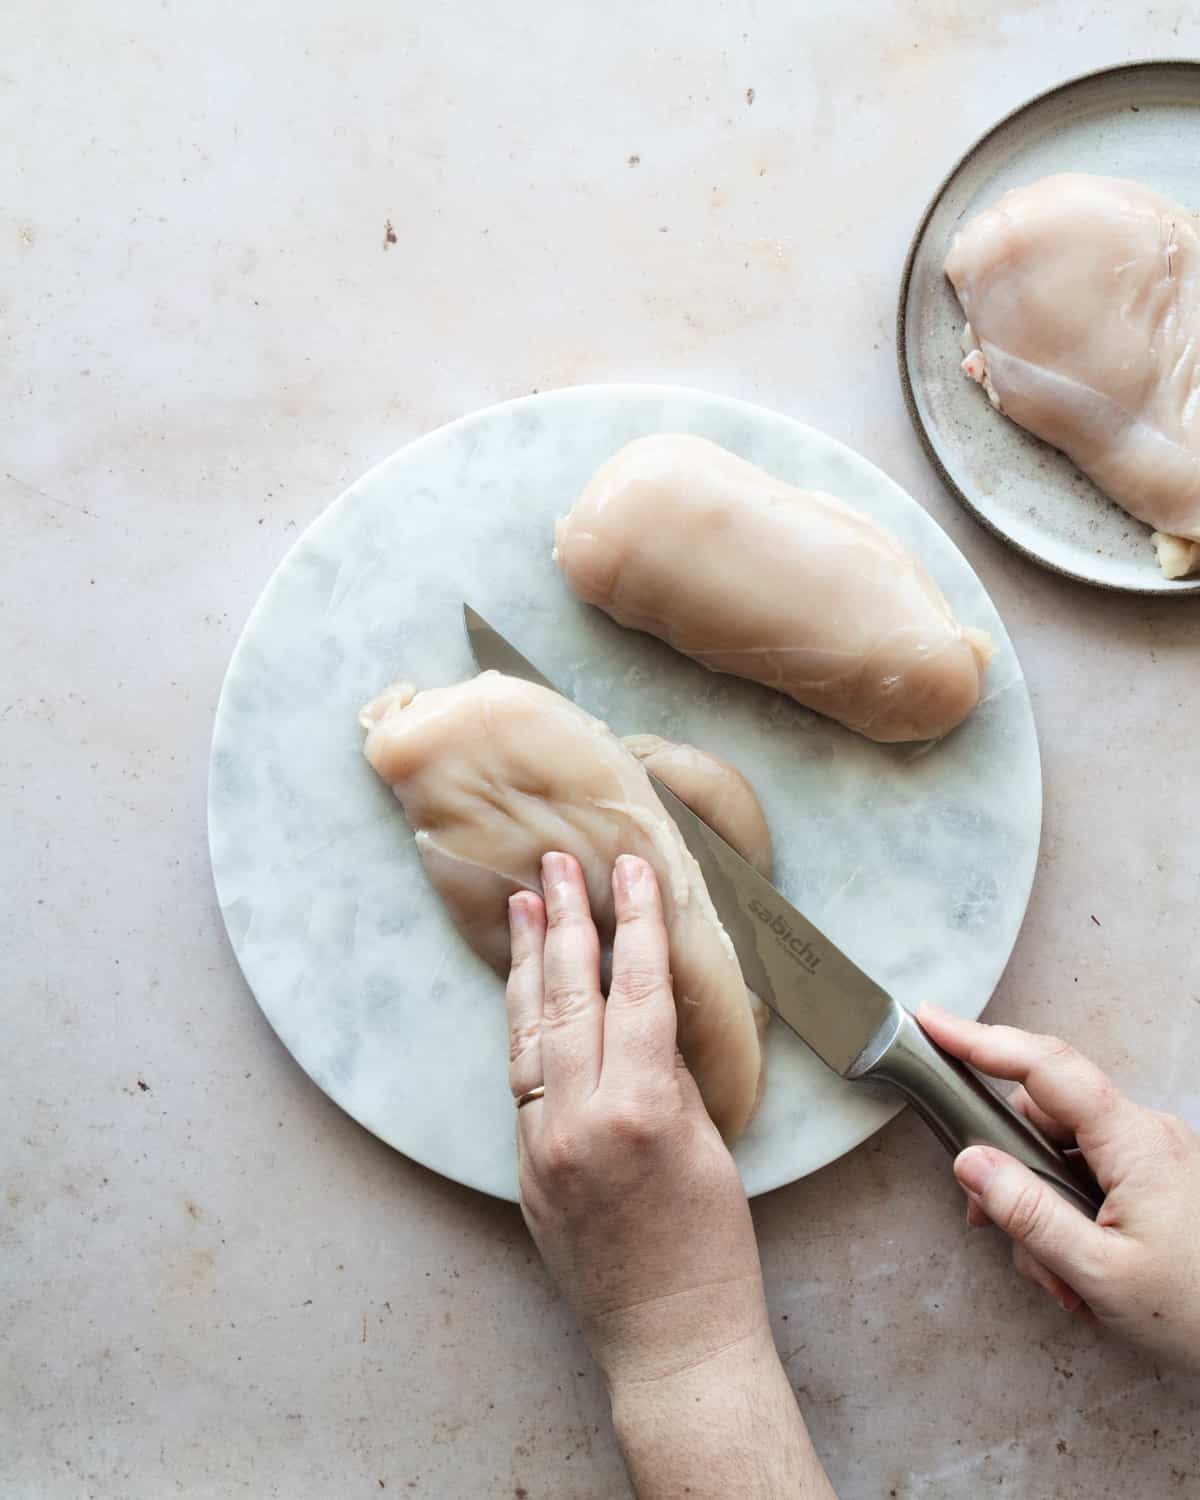 Hand slicing the chicken breast with a knife on a surface. 